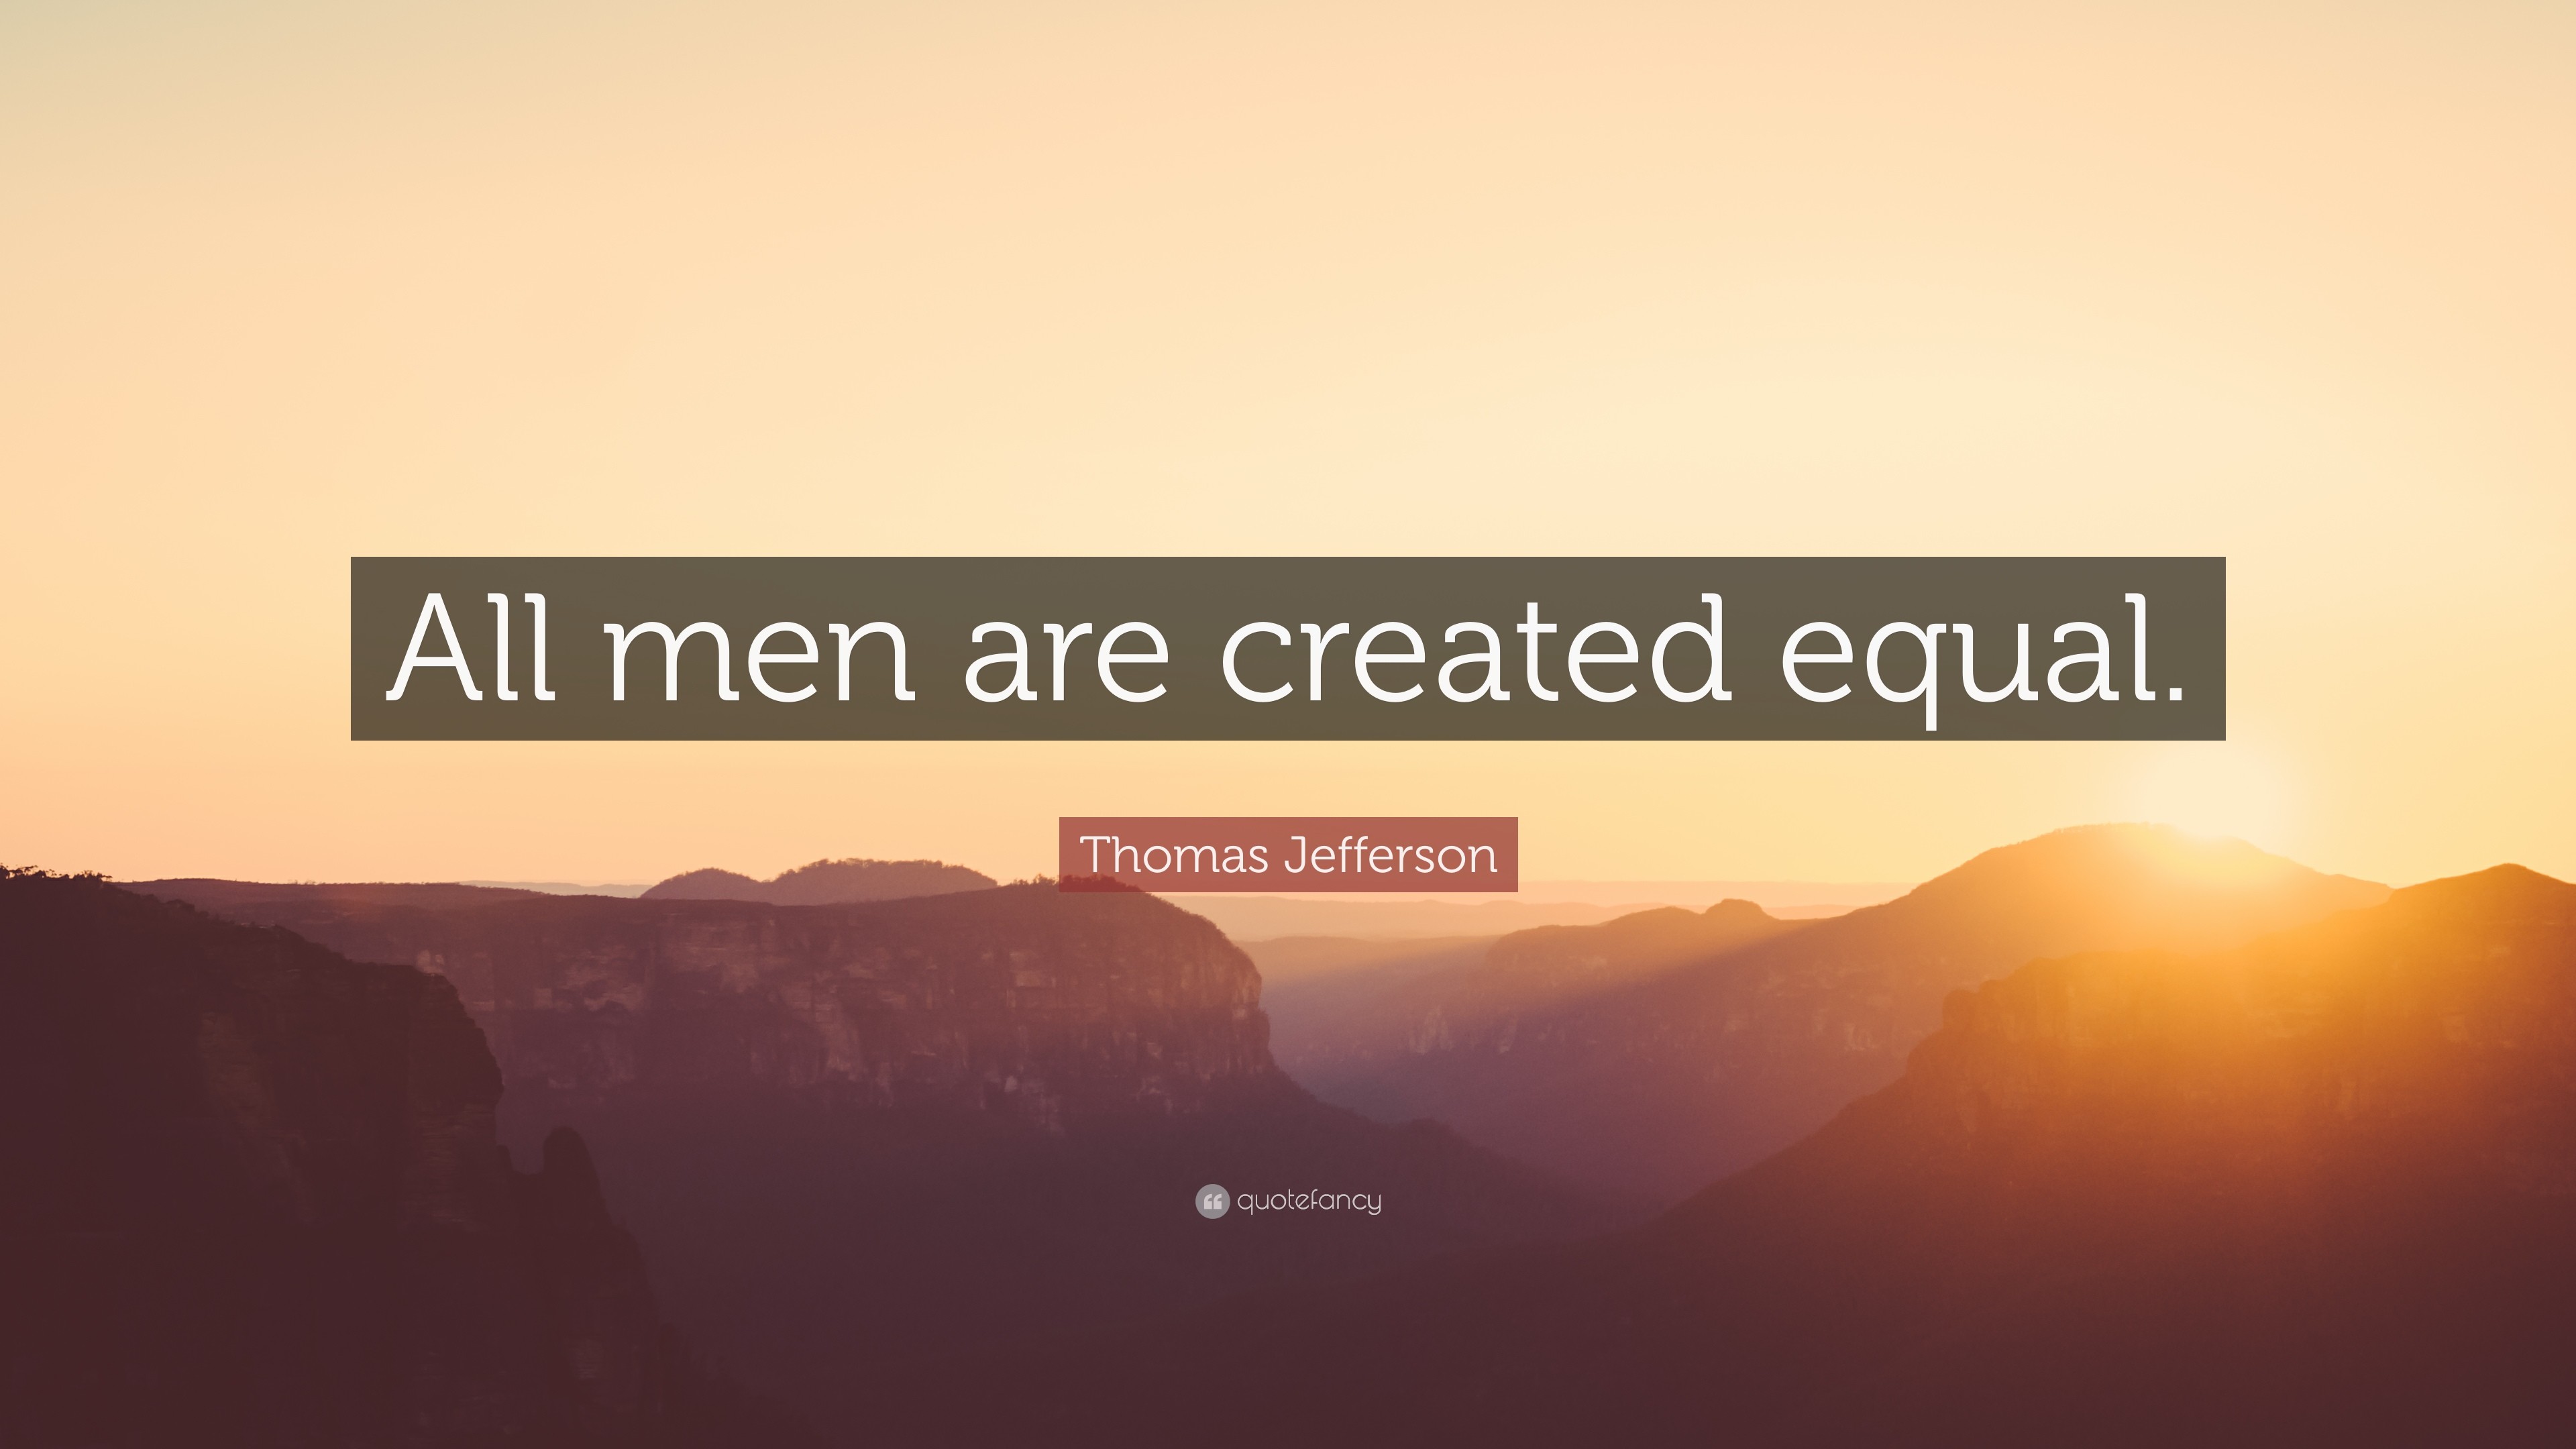 3840x2160 Thomas Jefferson Quote: “All men are created equal.”